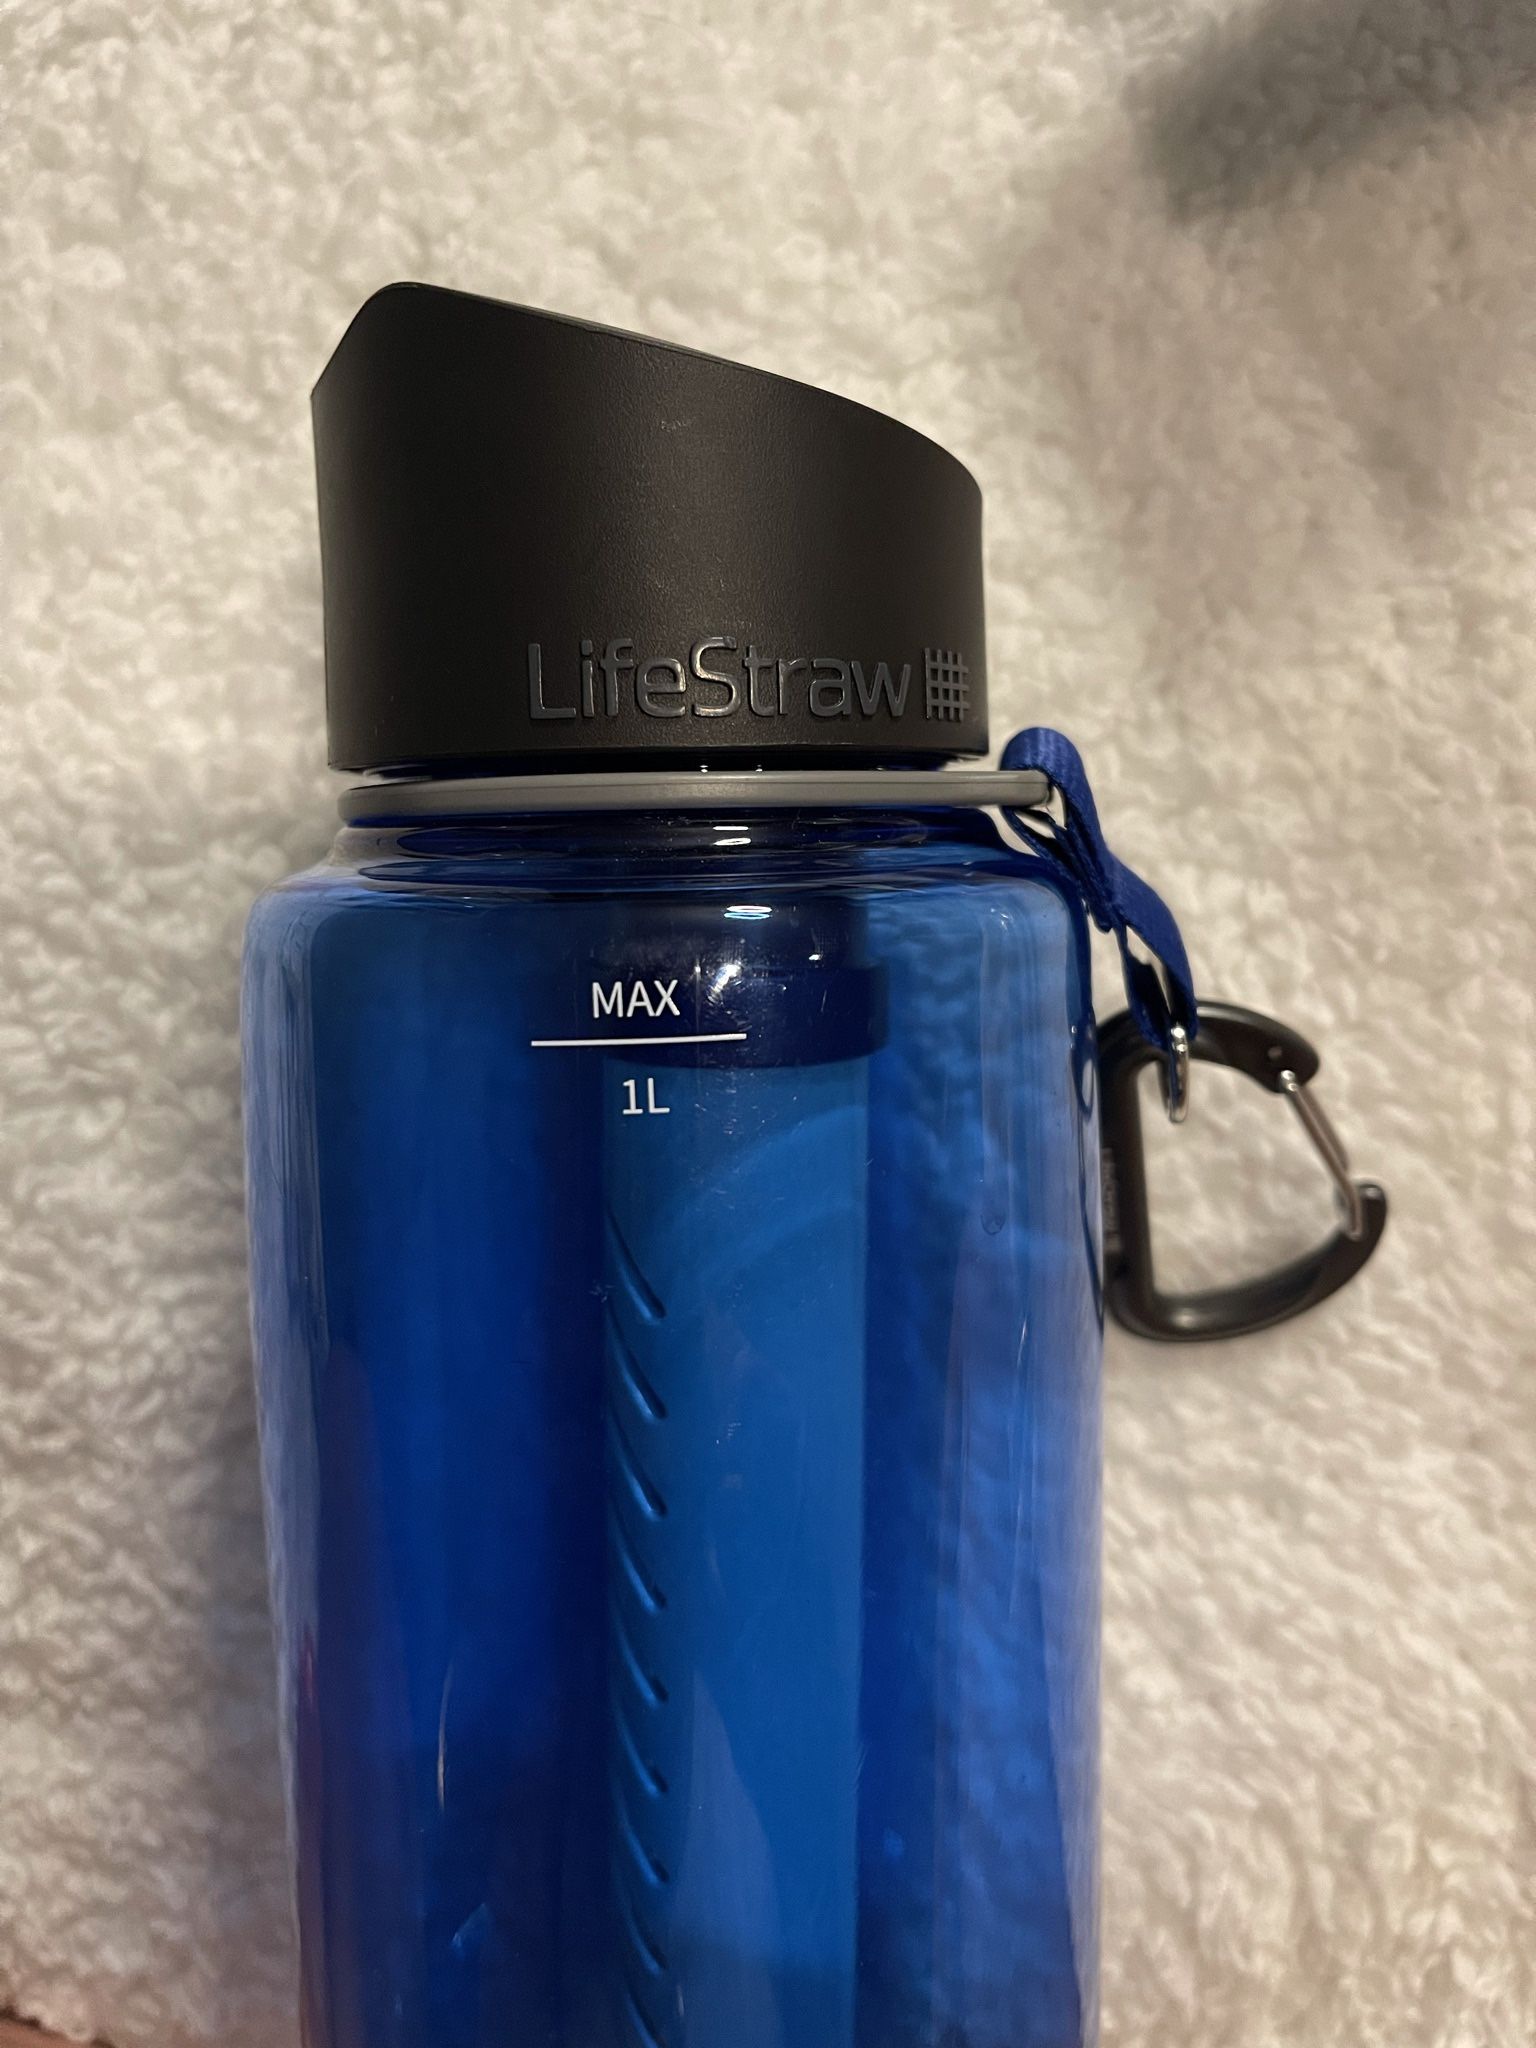 Lifestraw Water Bottle And Filters -  New!